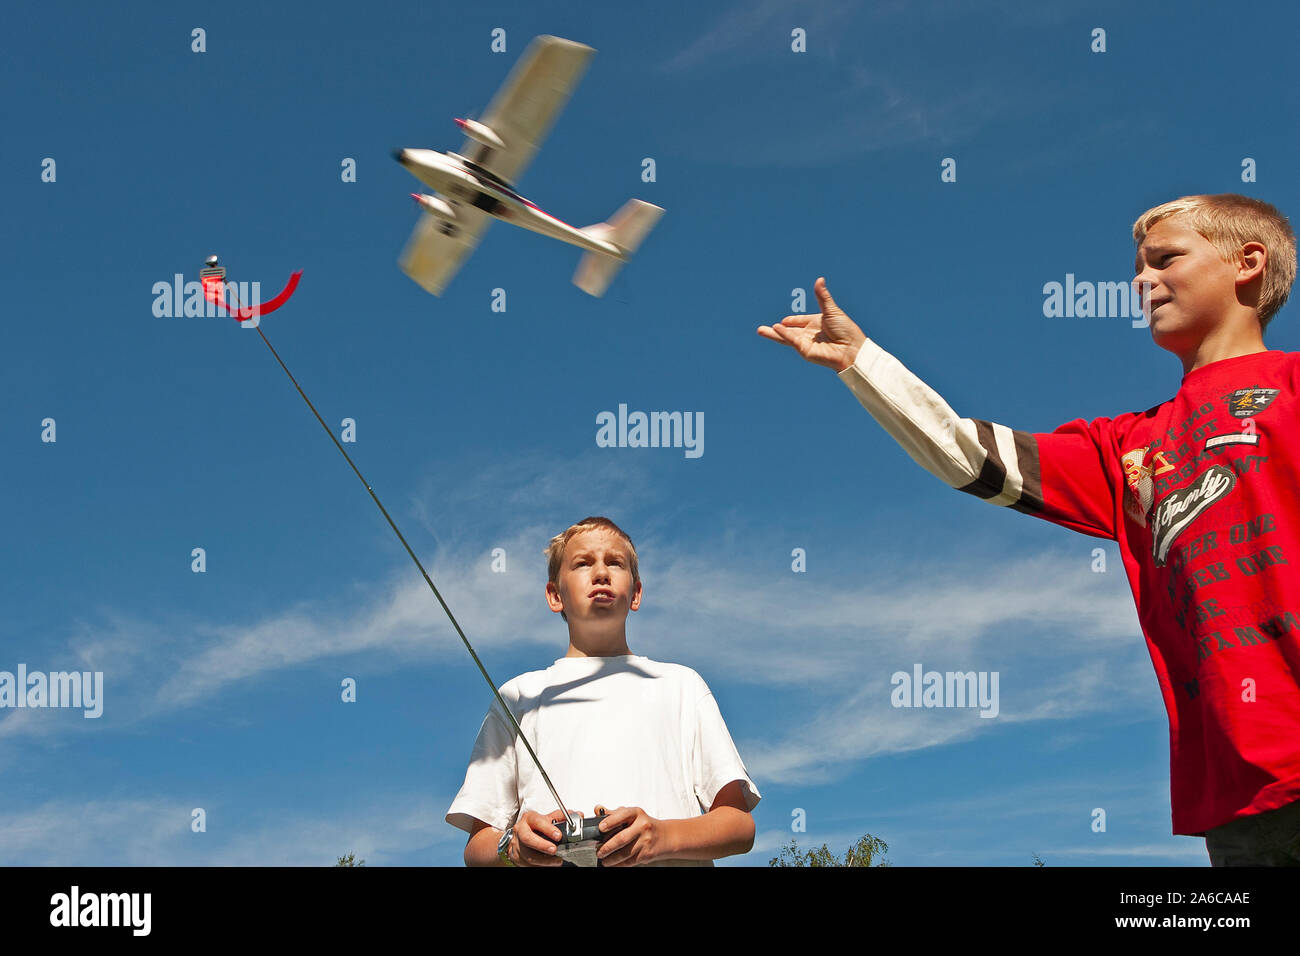 Two boys are flying a model plane. Stock Photo